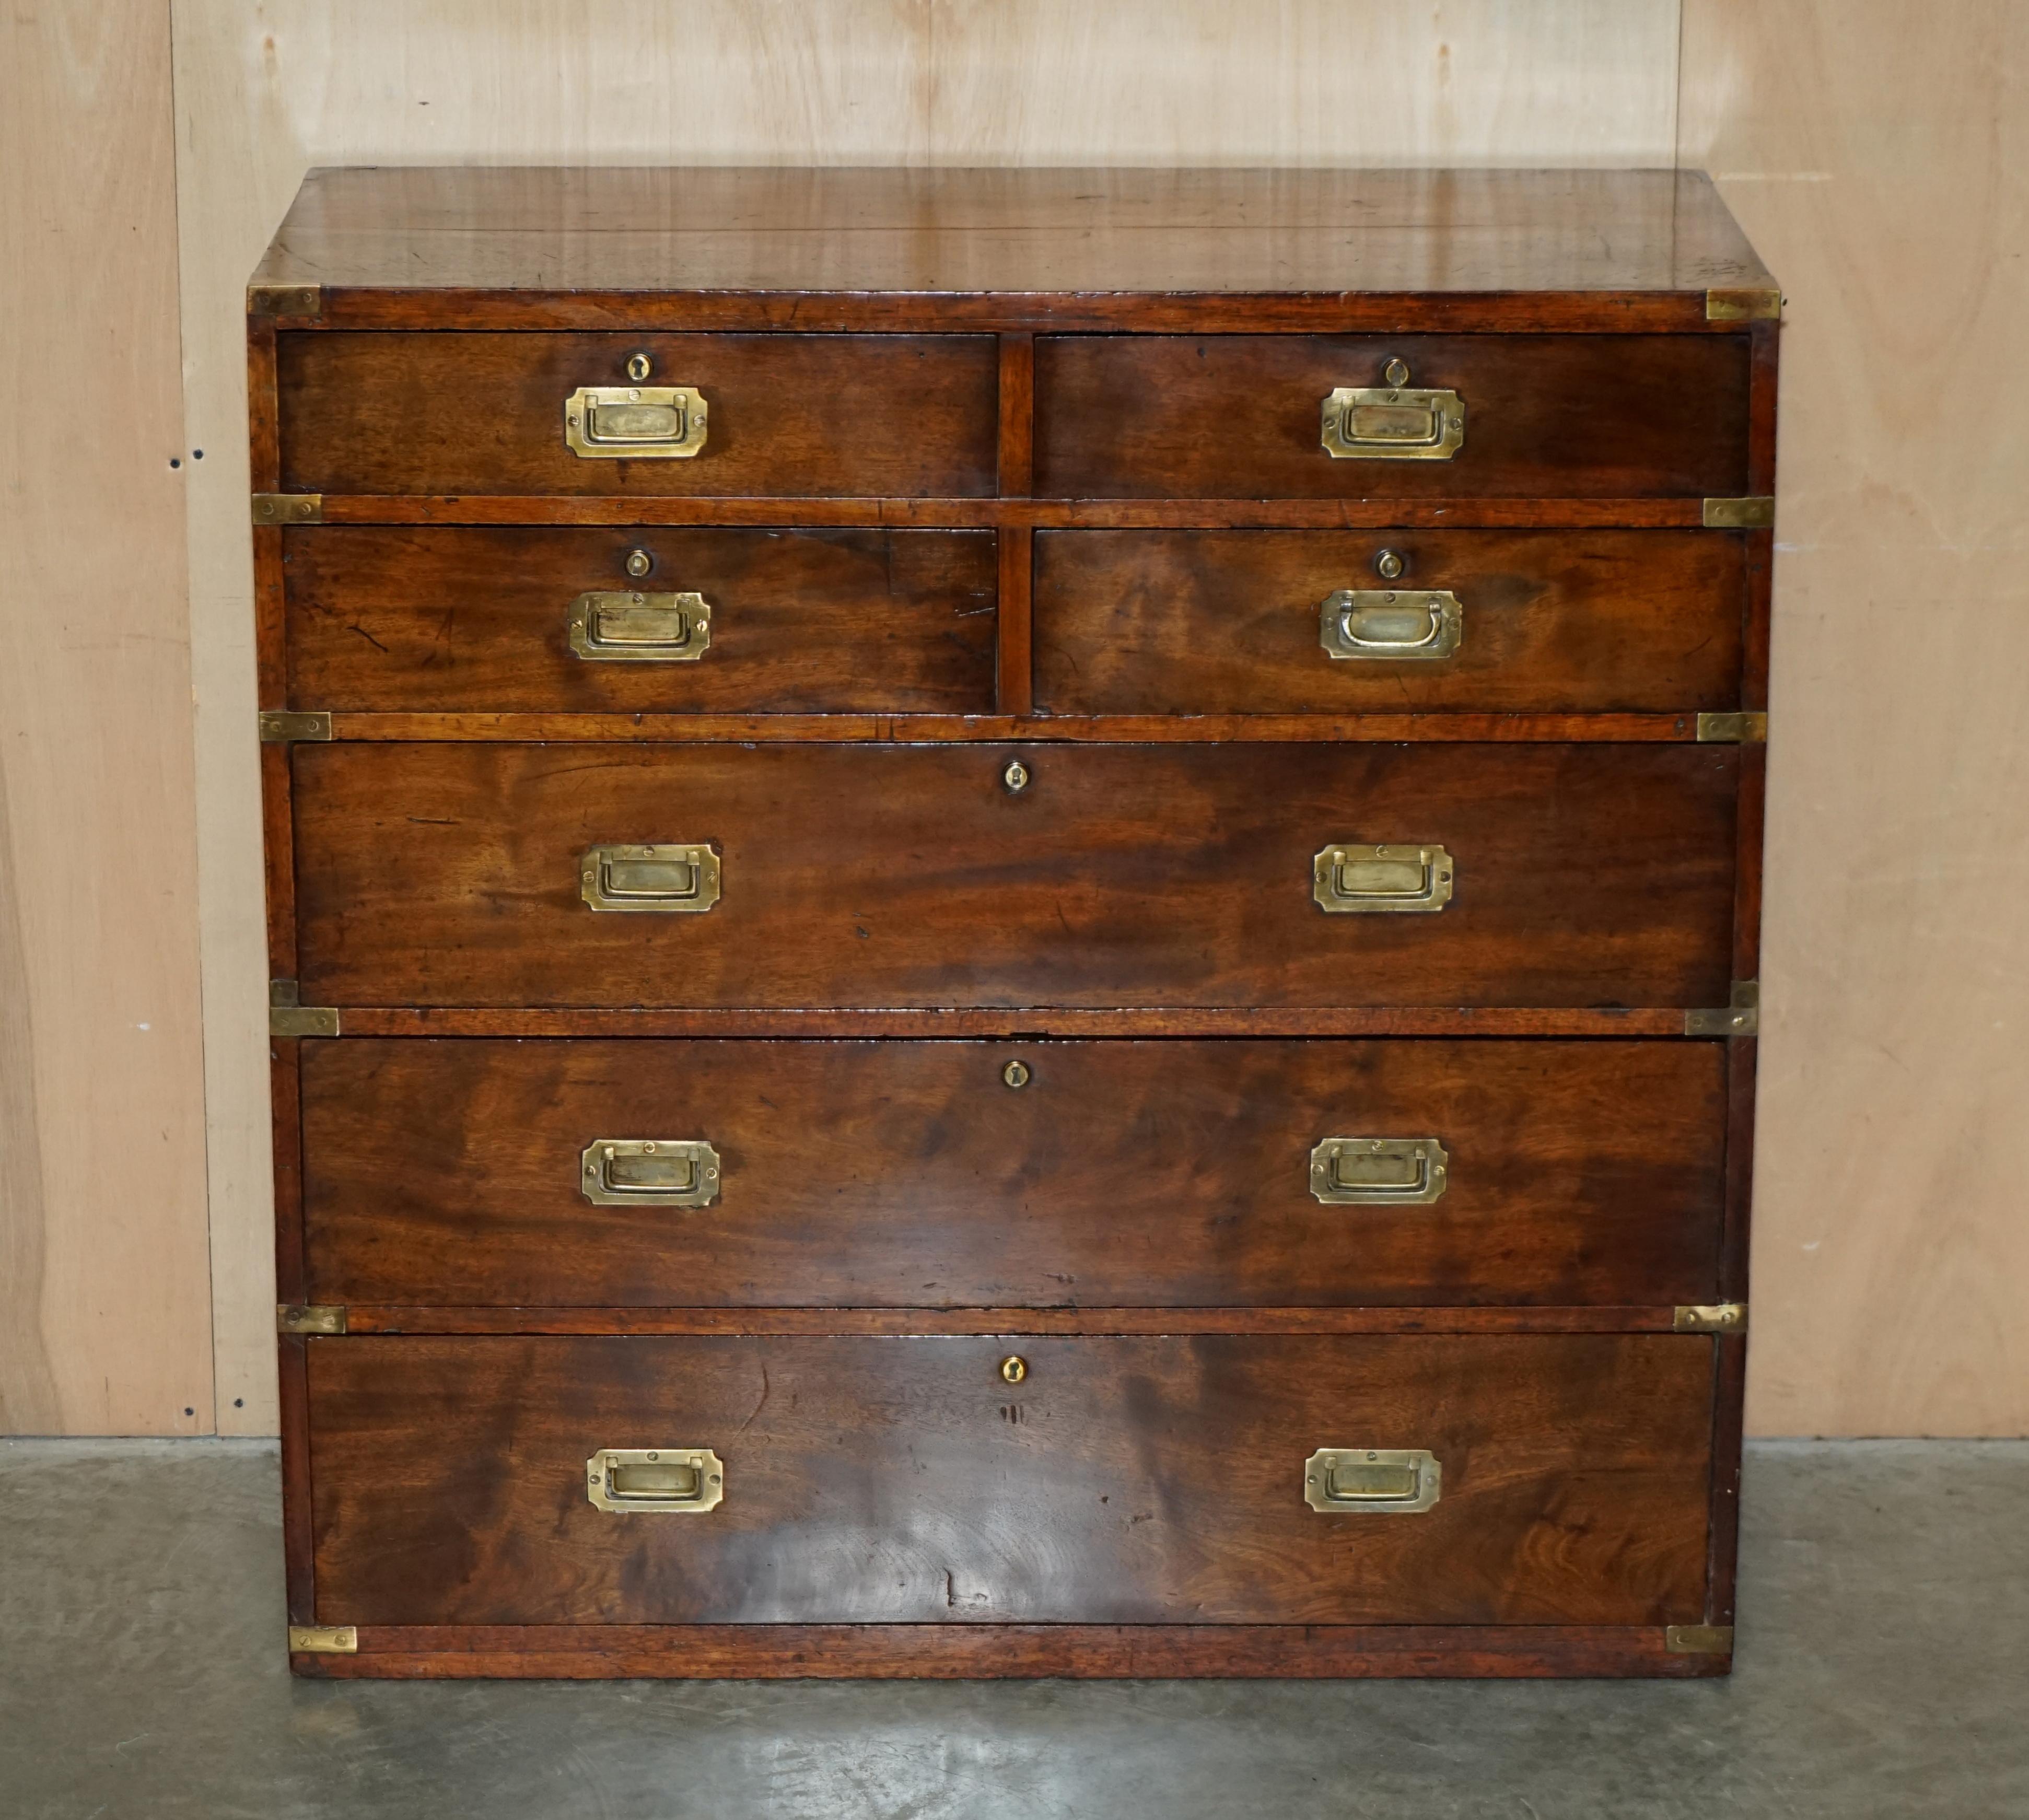 We are delighted to offer for sale this original Antique circa 1860-1880 fully restored Military Campaign chest of drawers in Honduras Mahogany with super rare four over three drawer configuration 

A very rare and desirable piece of military